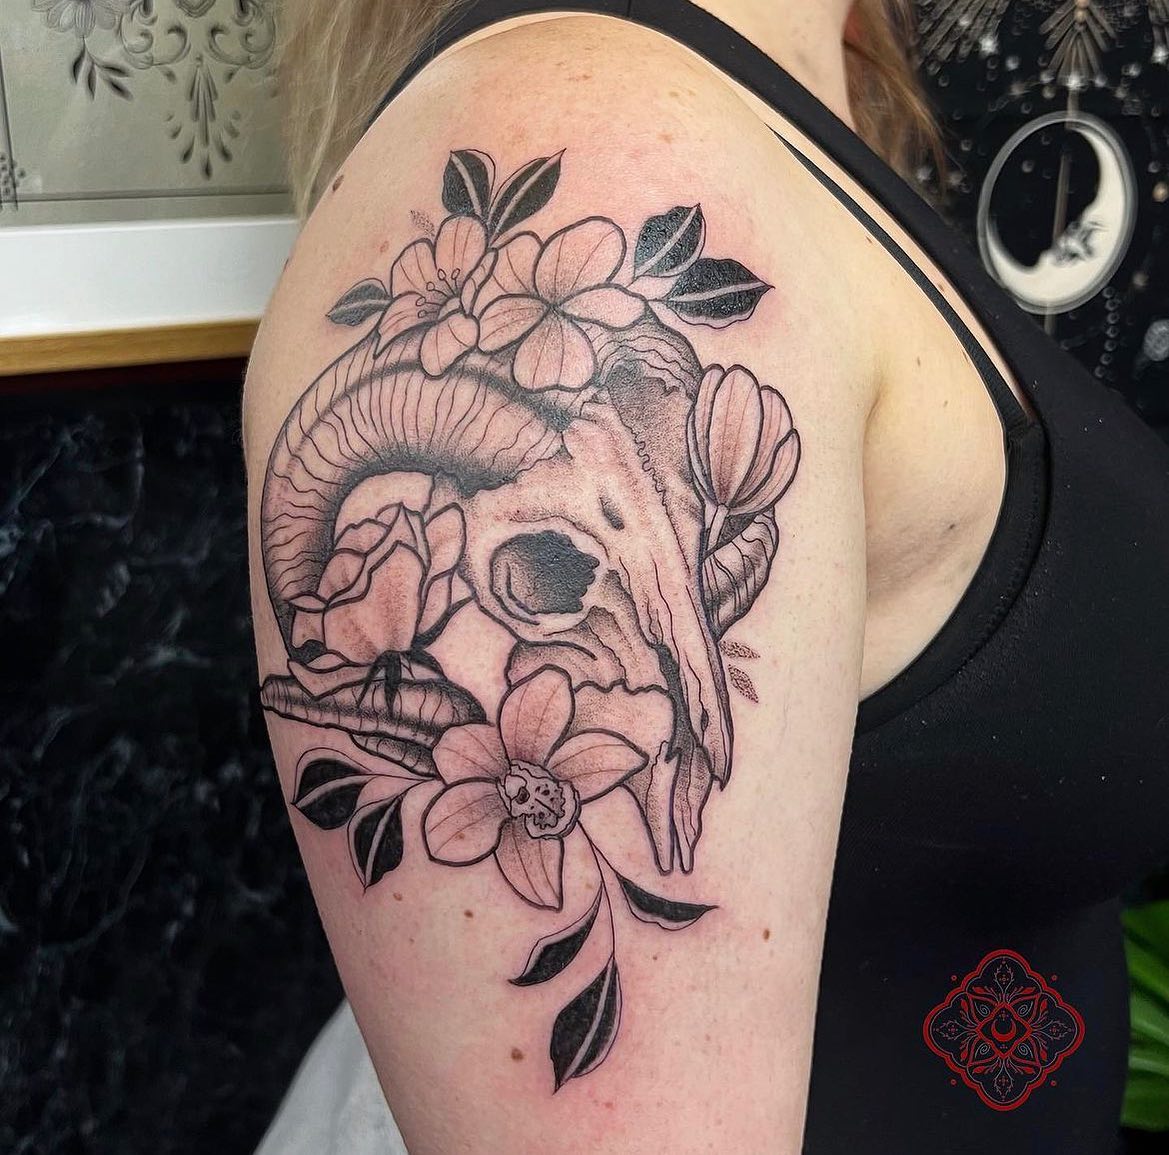 Queen of star sign tattoos thaisblanc does it again with this beautiful Aries and floral inspired tattoo!! 🐏 🌺

                        barber_dts easytattoo_uk eternalink dynamiccolor lockdownneedle stencilstuff      